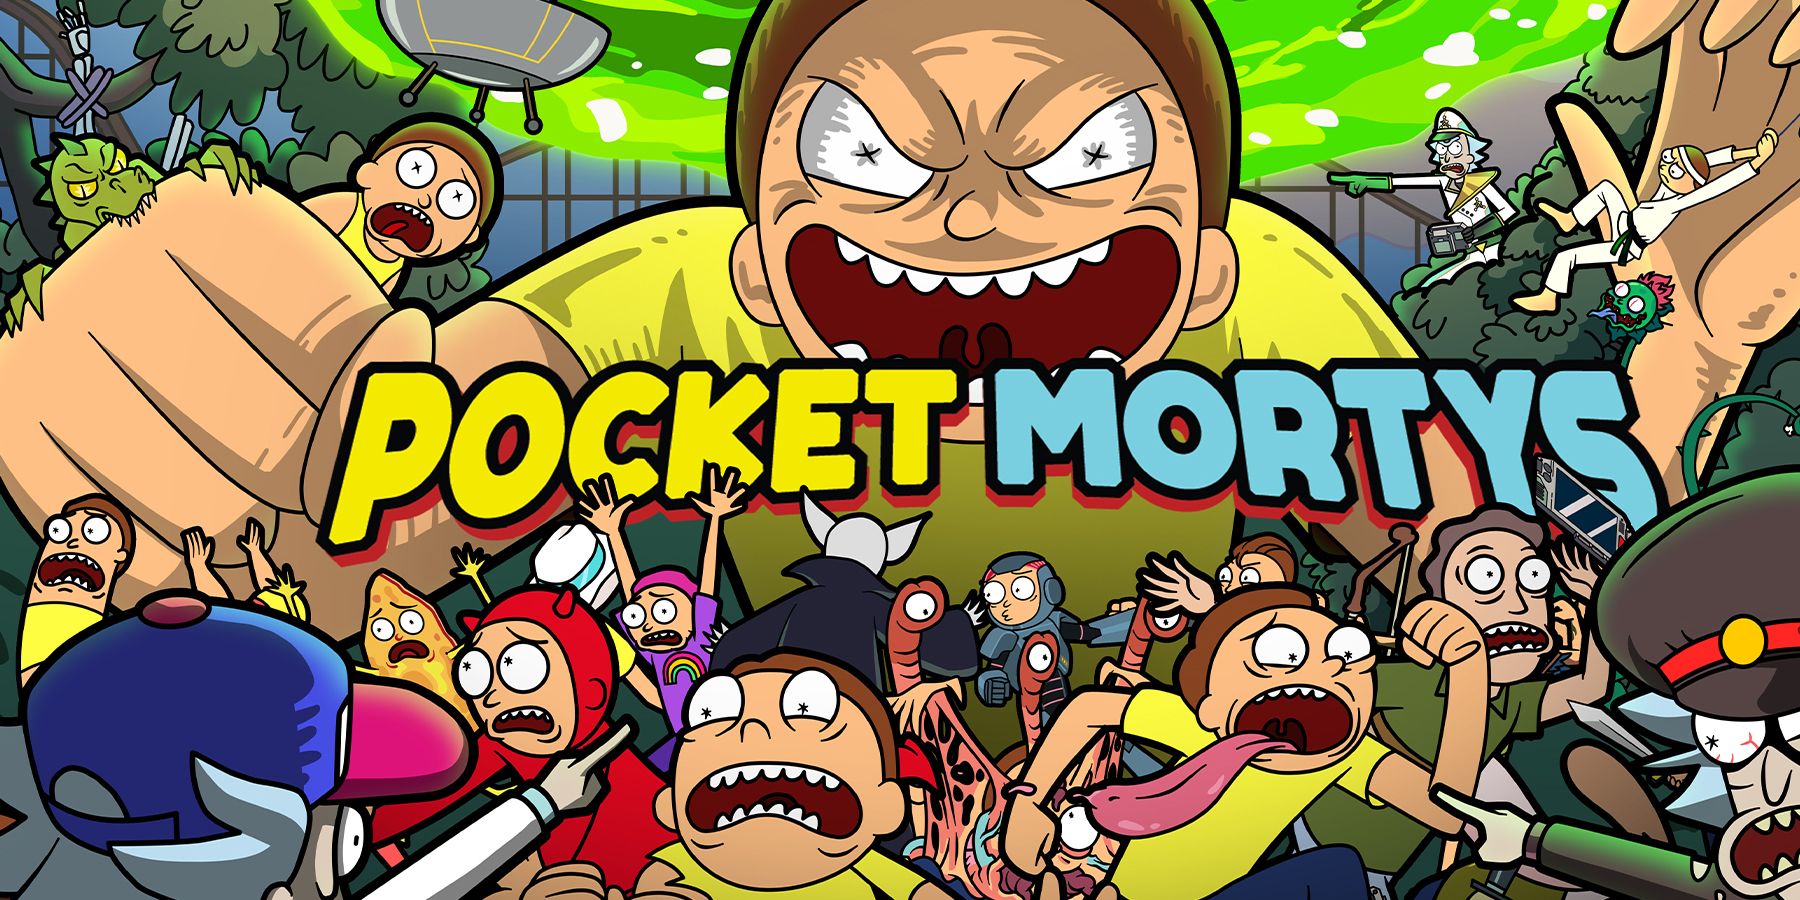 Pocket Mortys logo with several Mortys from the game.